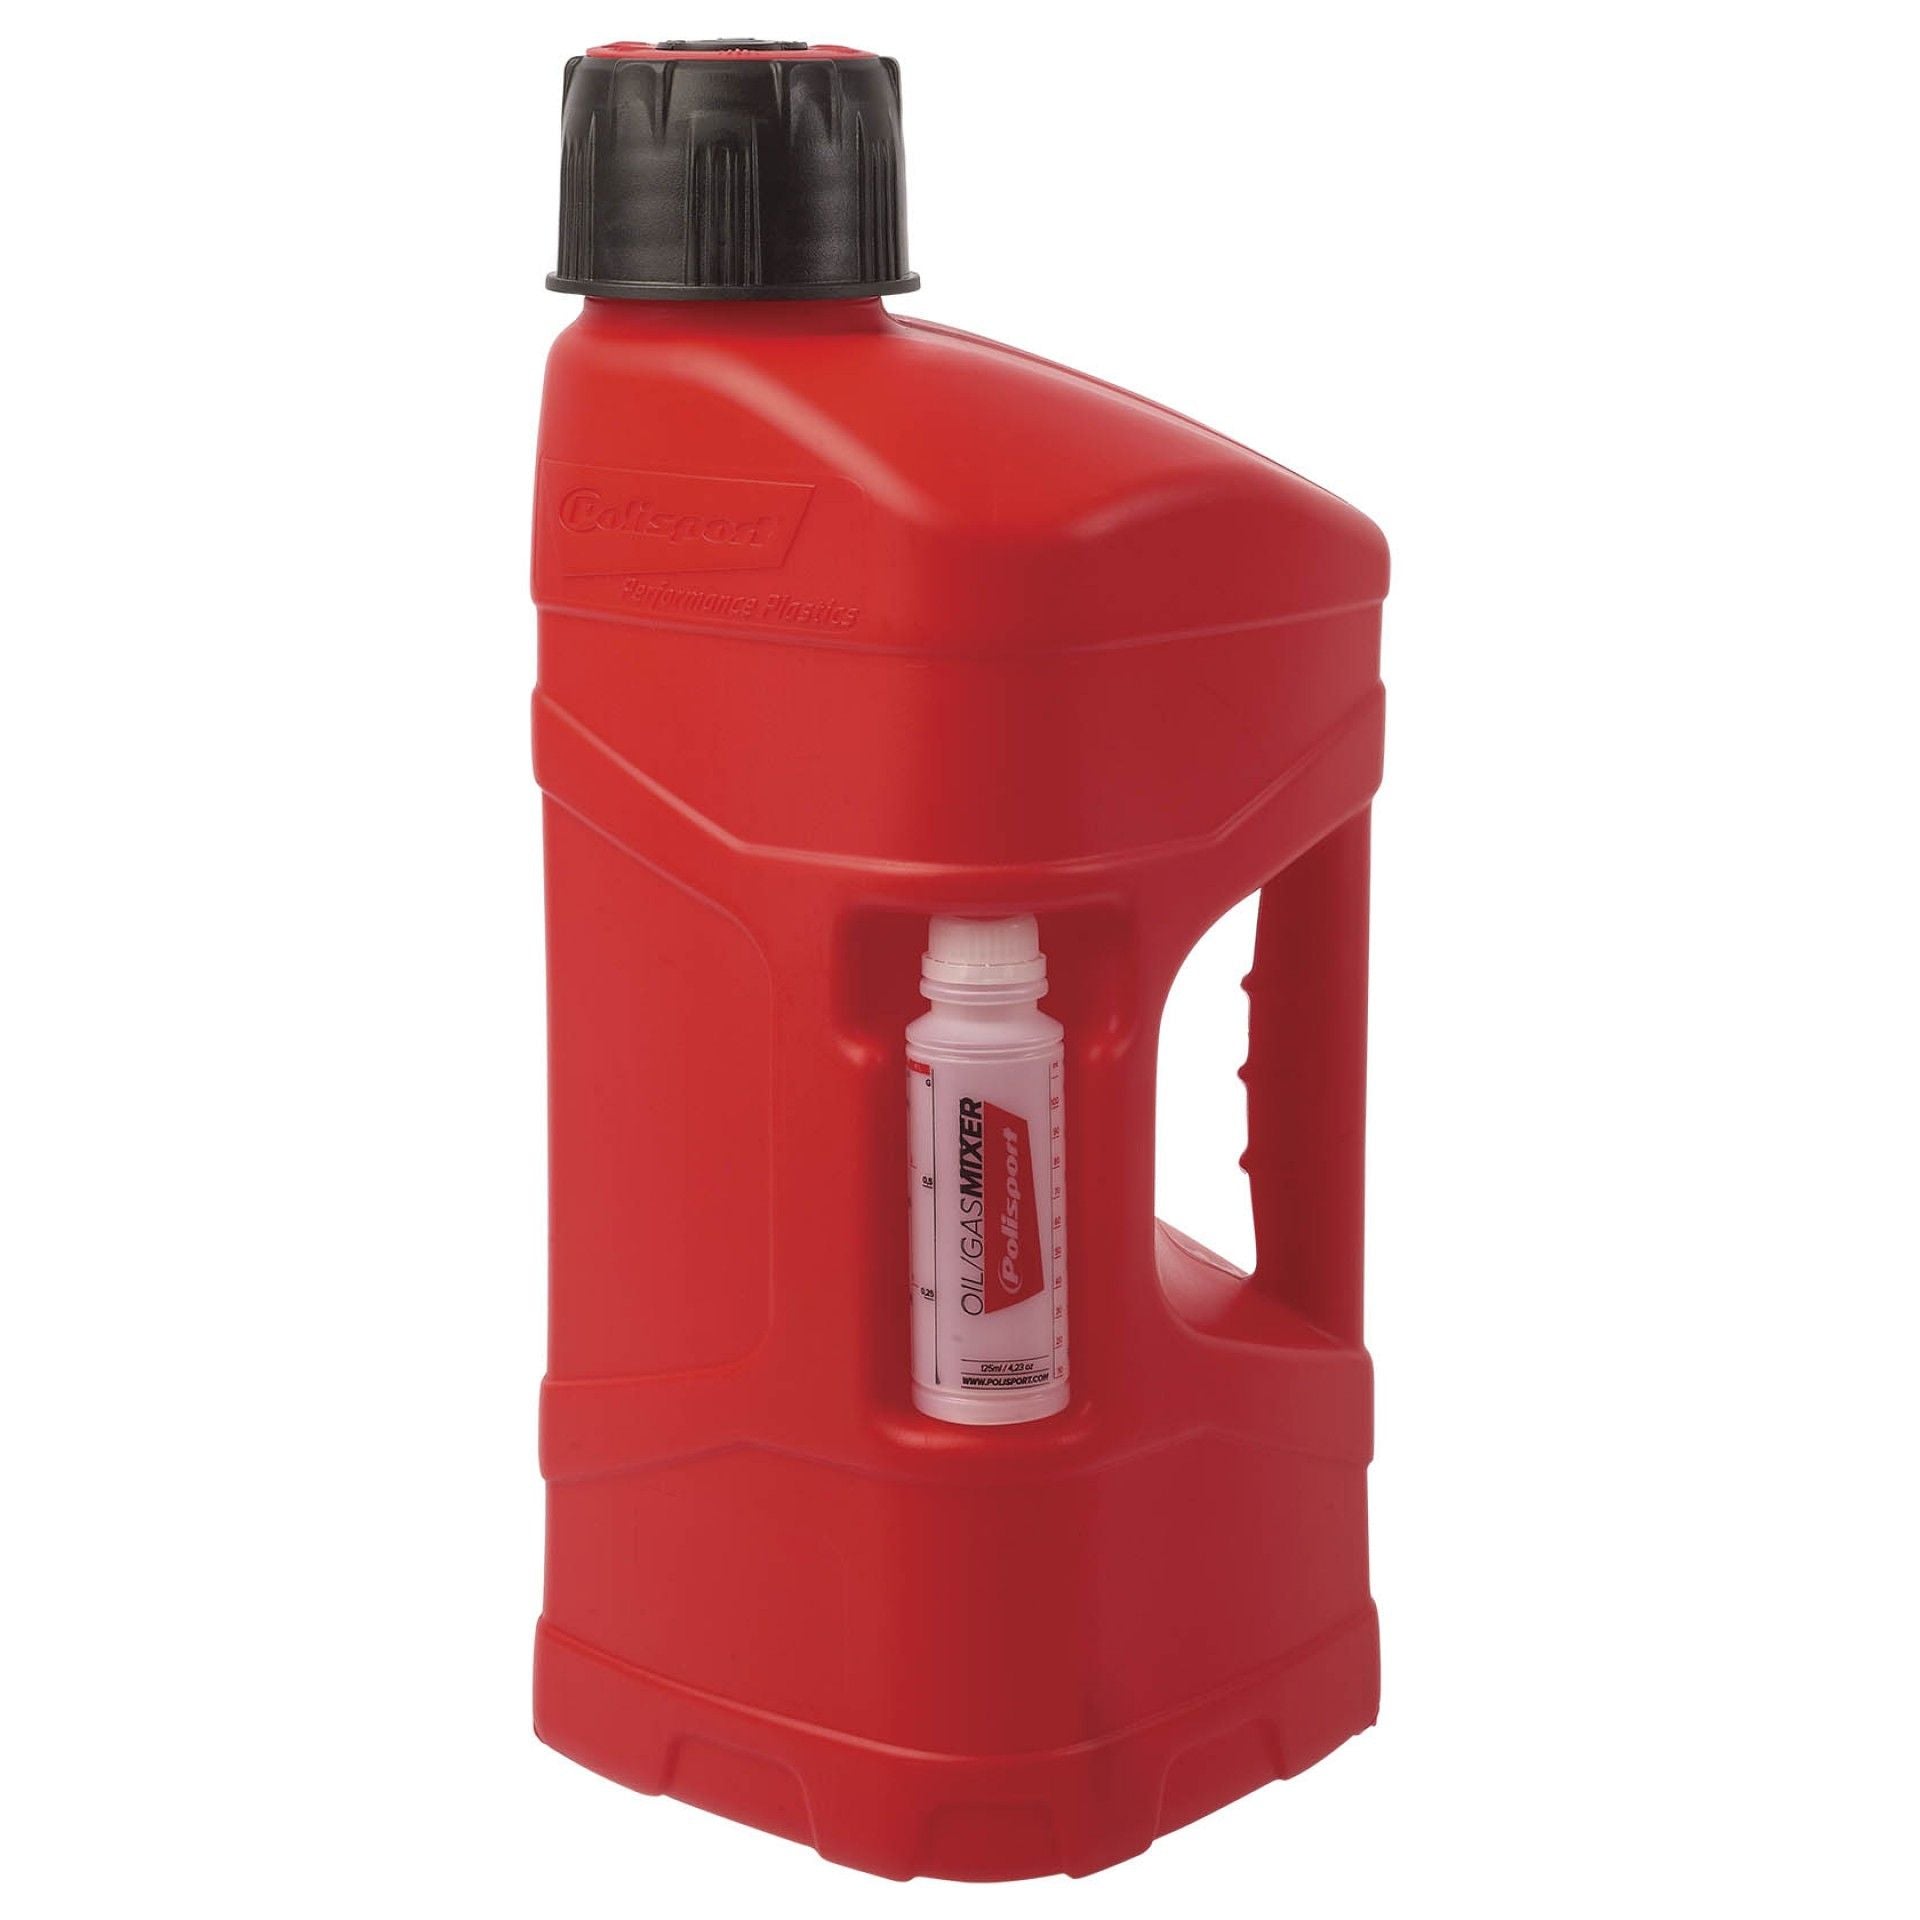 Polisport Pro-Octane 10 Litre Fuel Can with Fill Hose